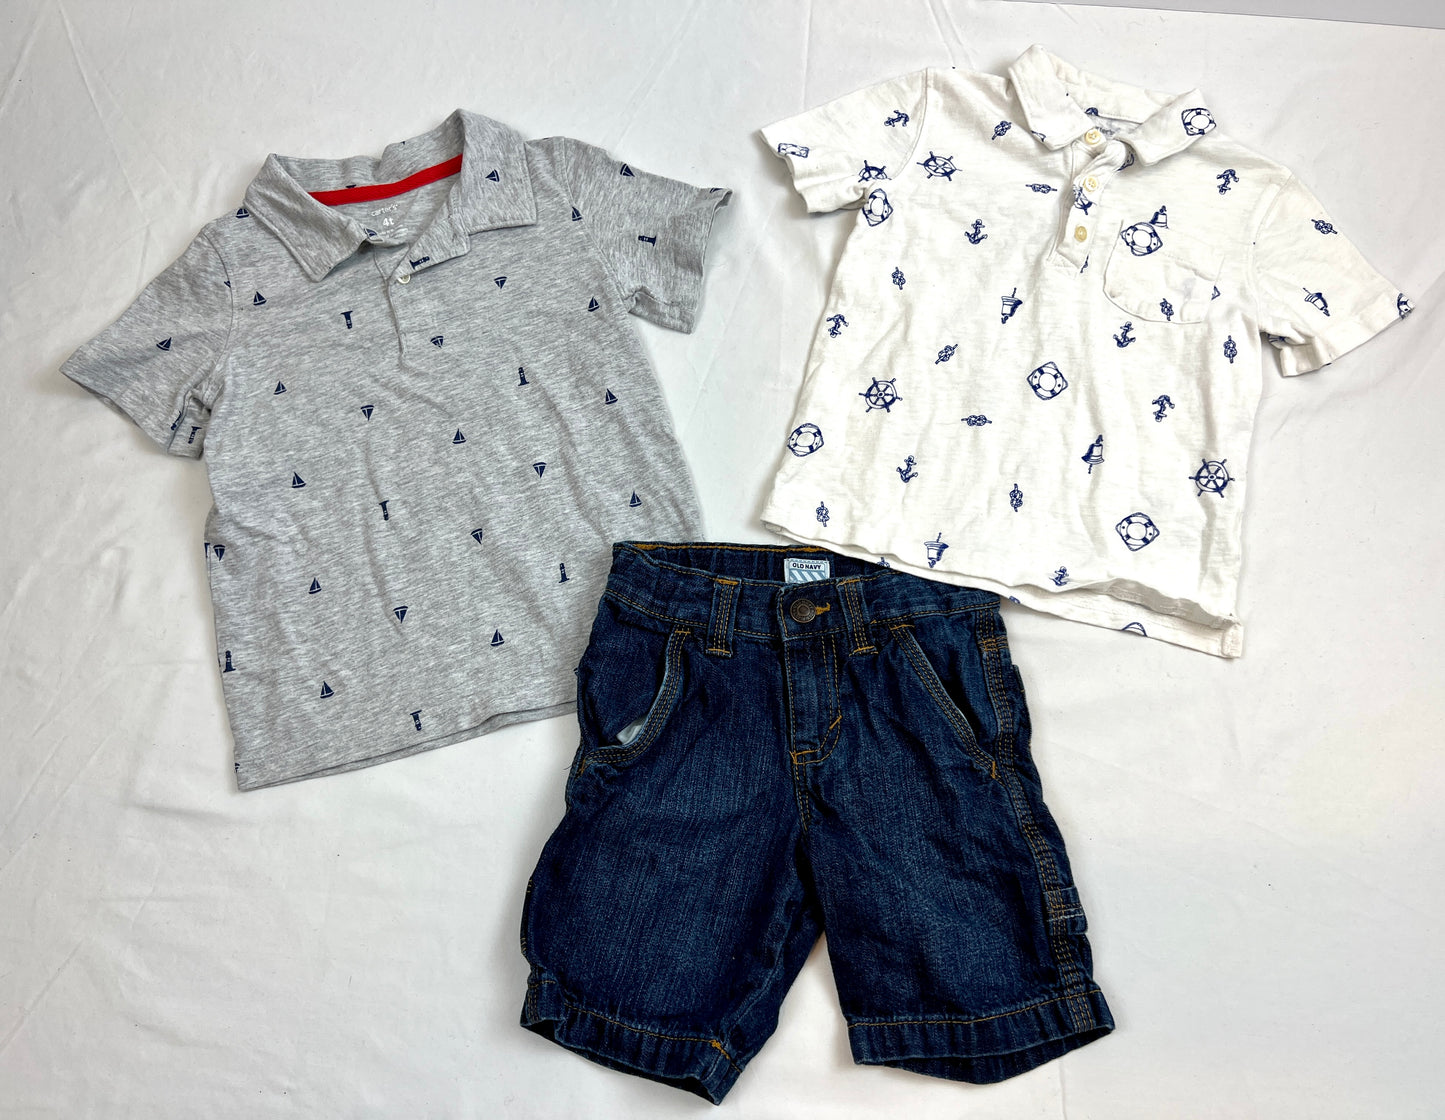 Boy 4T (3) Pieces: (2) Collared Shirts and (1) Old Navy Jean Shorts w/ Pockets EUC Nautical Themed Anchors Sail Boat